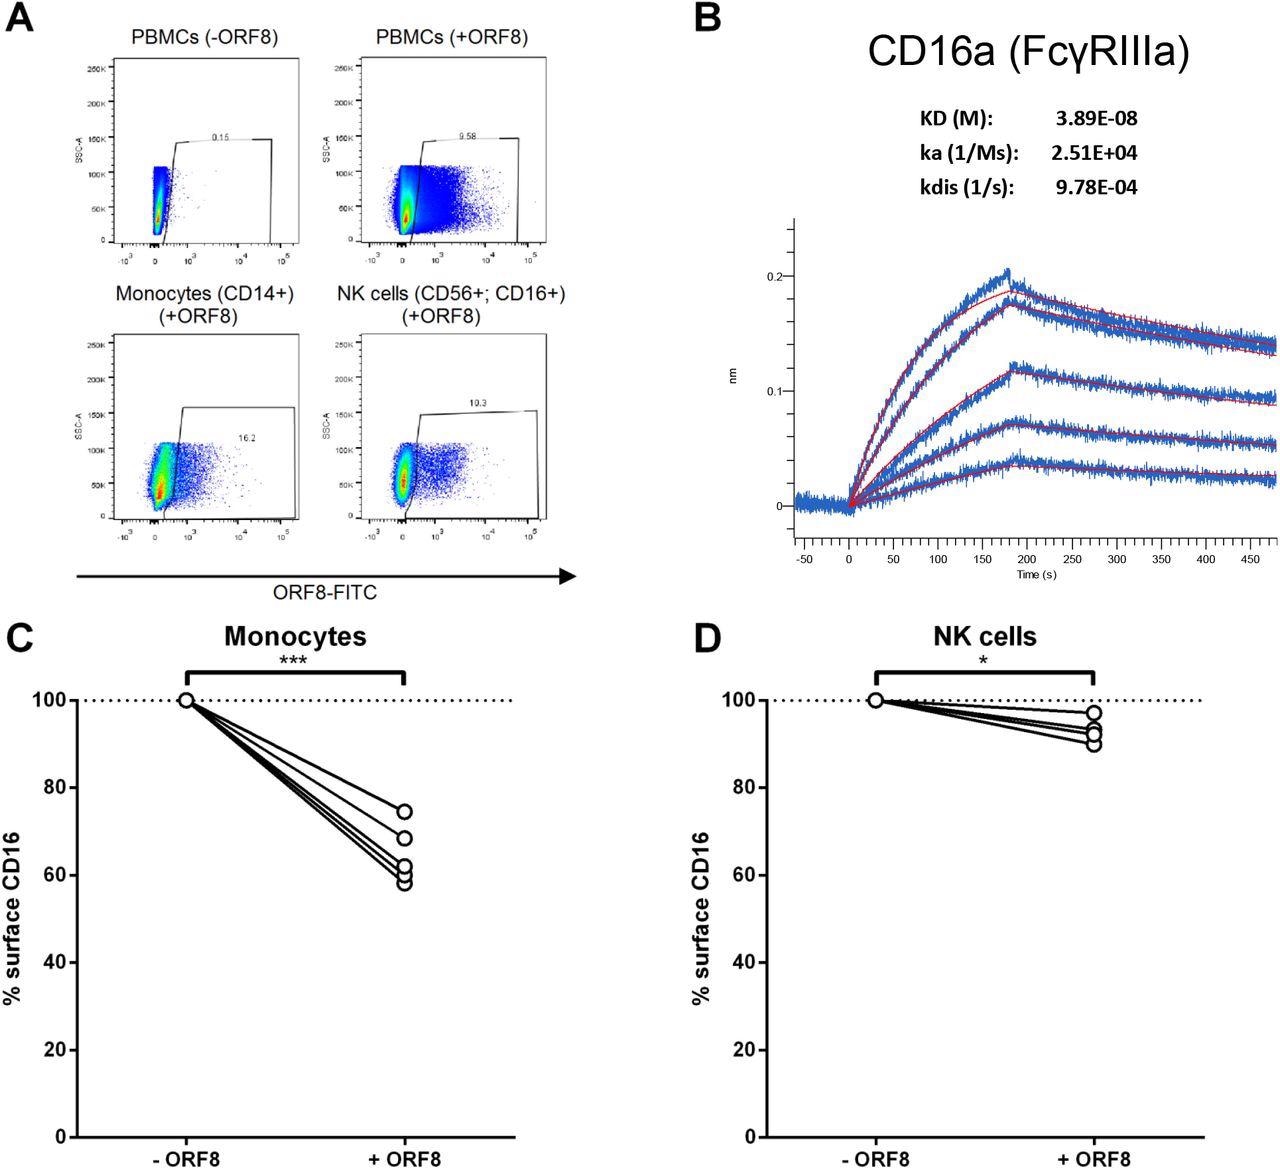 ORF8 binds monocytes and NK cells through CD16a. (A) PMBCs were incubated with FITC-conjugated recombinant ORF8 protein on ice for 30 min, followed by staining with anti-CD14-V450, and anti-CD16-PE-CY7 and anti-CD56-PE antibodies before being fixed with 4% PFA and analyzed with flow cytometer. (B) AR2G biosensors loaded with CD16a protein were soaked in two-fold dilution series of ORF8 (31.25 nM - 500 nM). Raw data are shown in blue and model in red. The affinity constant (KD), on rate (Ka) and off rates (Kdis) were calculated using a 1:1 binding model. (C, D) PBMCs from different donors were thawed and incubated for 16 hours with ORF8. The following day, the PBMCs were stained with anti-CD3, anti-CD14, anti-CD56, anti-CD16 and LIVE/DEAD Fixable Aqua Dead Cell Stain and analyzed by flow cytometry to measure surface levels of CD16 on (C) monocytes (n=5) and (D) NK cells (n=4). Cell-surface CD16 levels in presence of ORF8 were normalized on cell-surface CD16 detected in absence of ORF8. Statistical significance was evaluated using a parametric paired t-test.